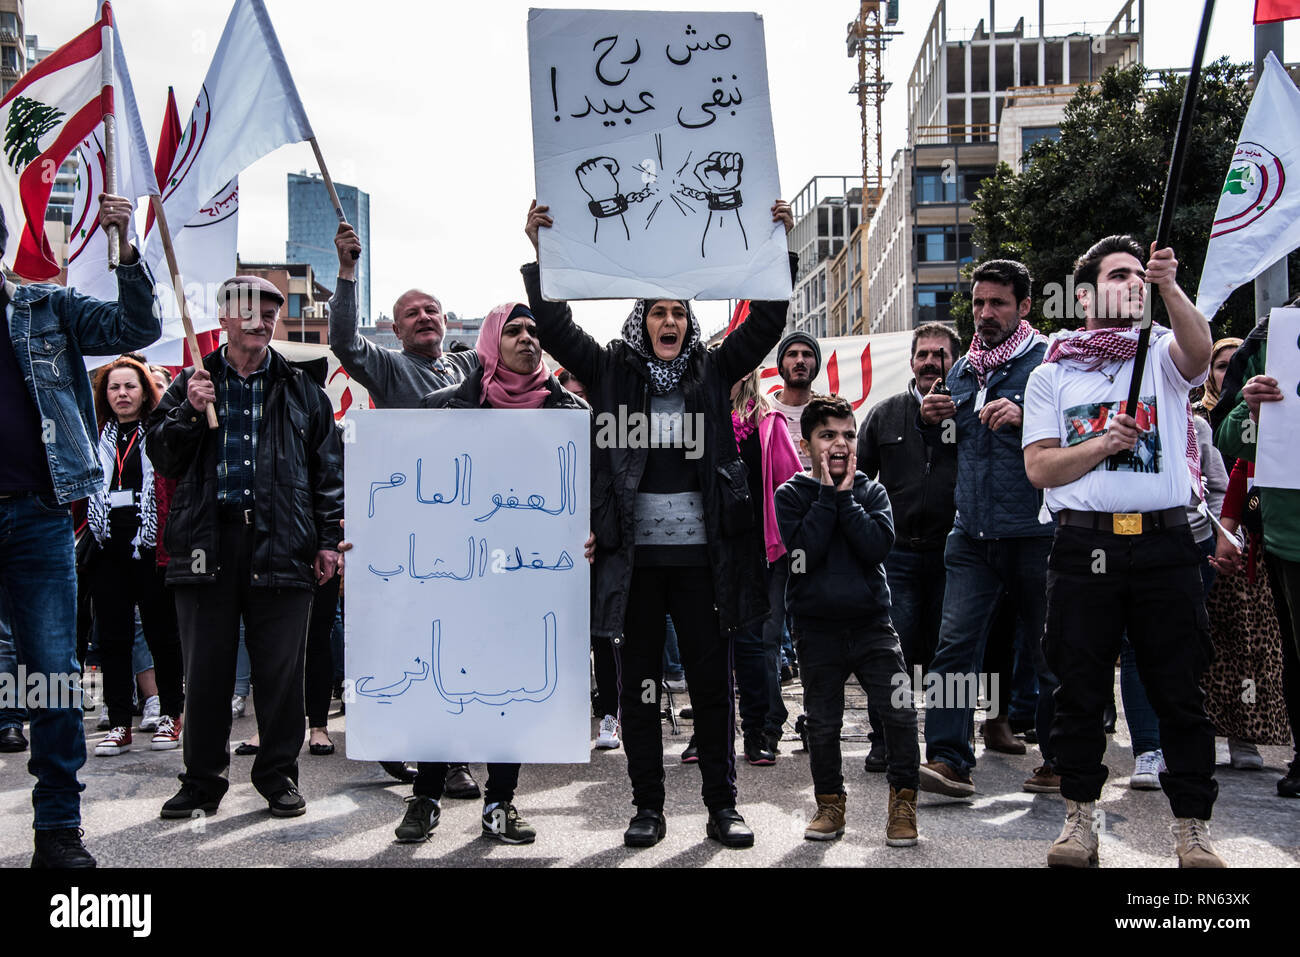 Beirut, Lebanon. 17th Feb, 2019. Citizens march through Beirut in protest of financial inequality and appalling lack of basic public services in Lebanon. Calling for a non-secular government structure, decent public services and an end to corruption, they say they will be coming out every two weeks to peacefully put pressure on a status quo that has been unbearable for too long. Beirut, Lebanon, 17 February 2019. Credit: Elizabeth Fitt/Alamy Live News Stock Photo